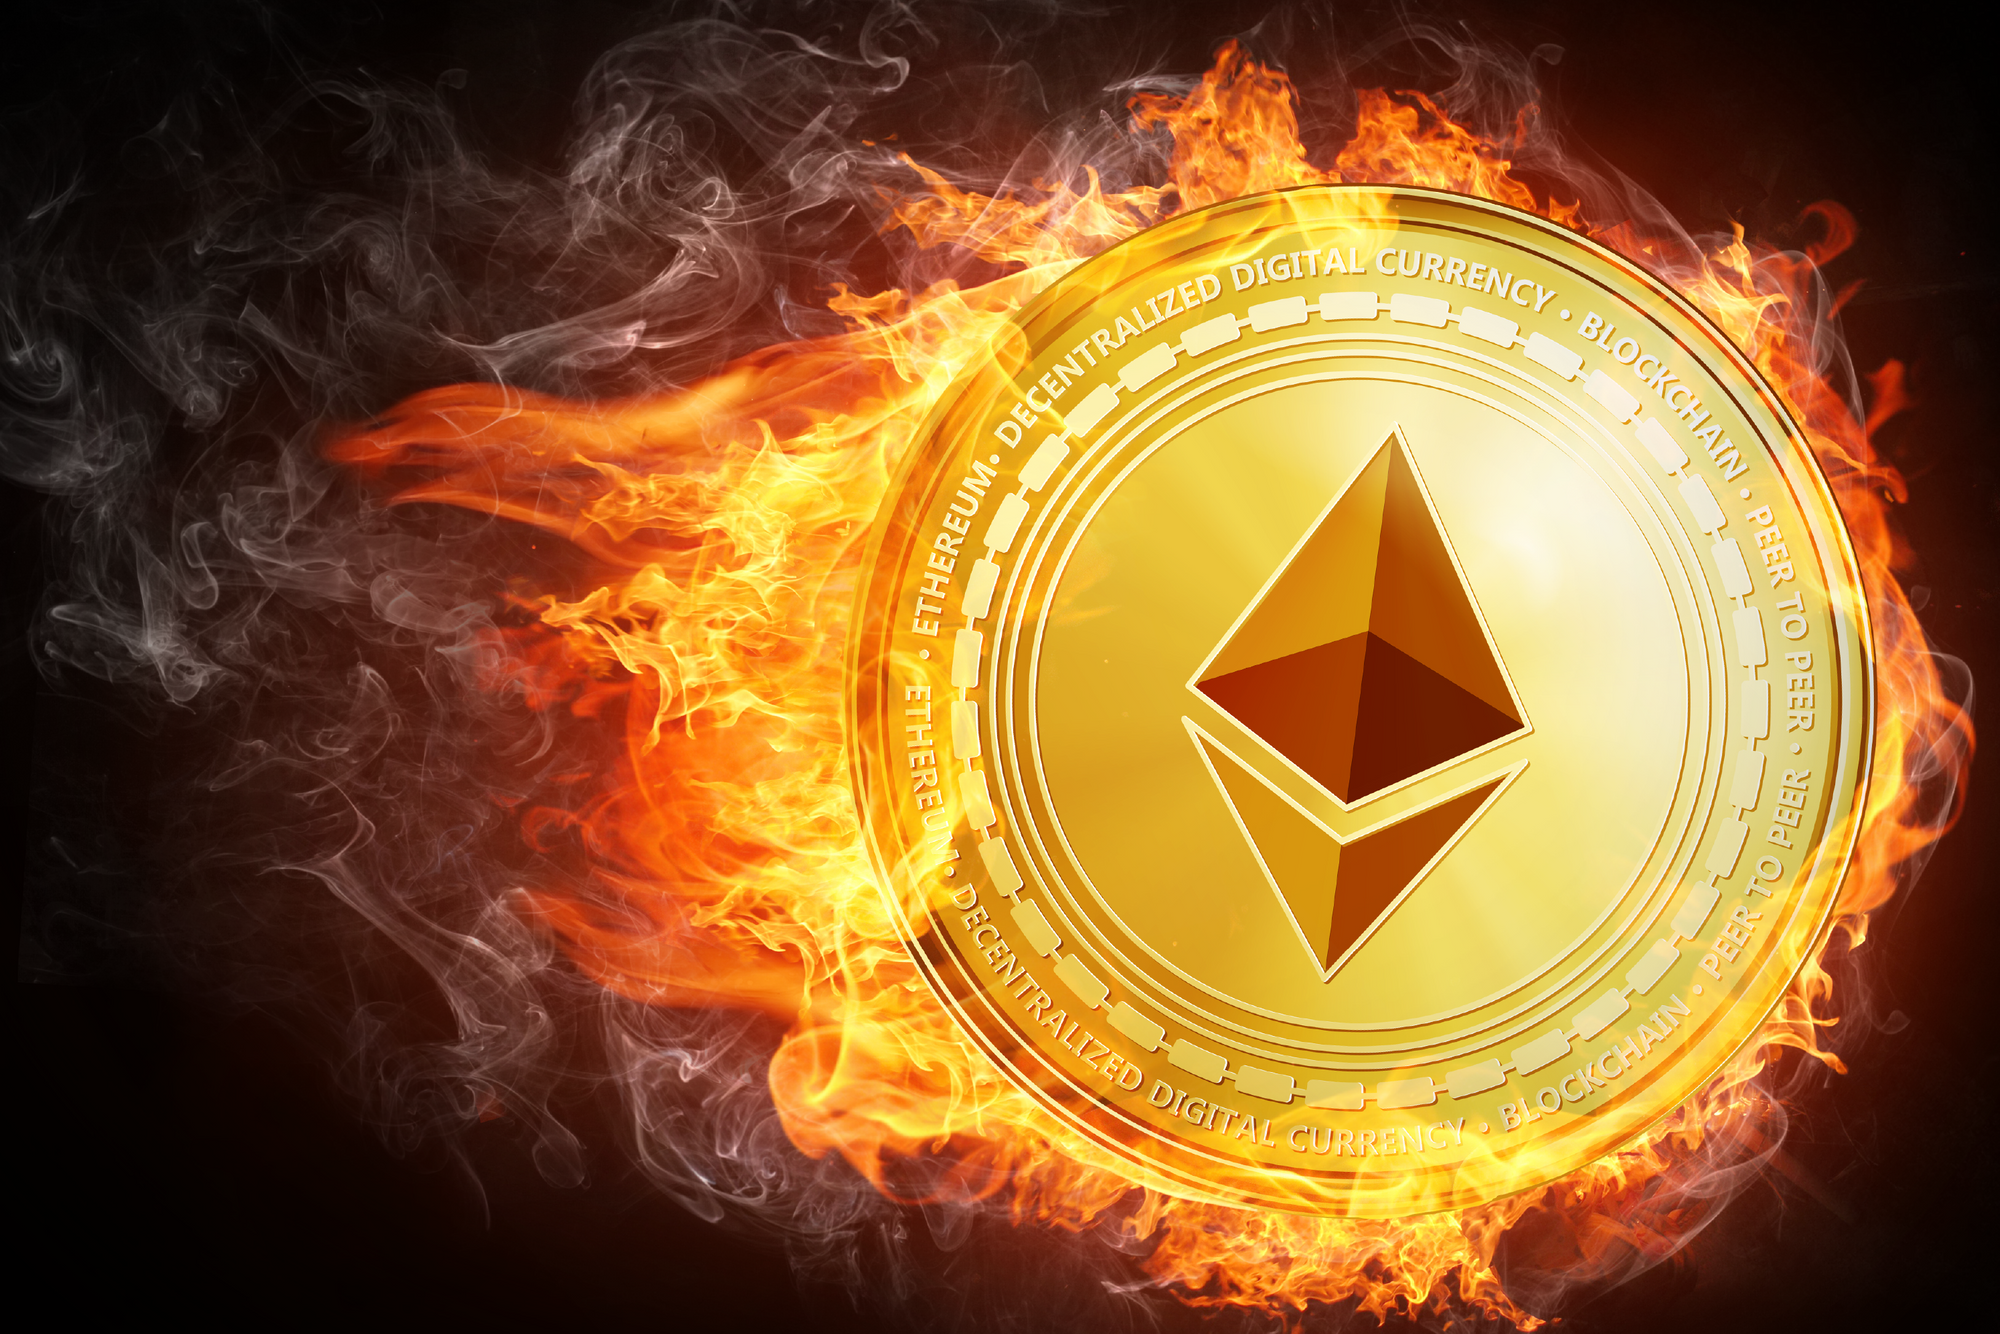 Ethereum’s London hard fork causes 13 ETHs to burn every minute